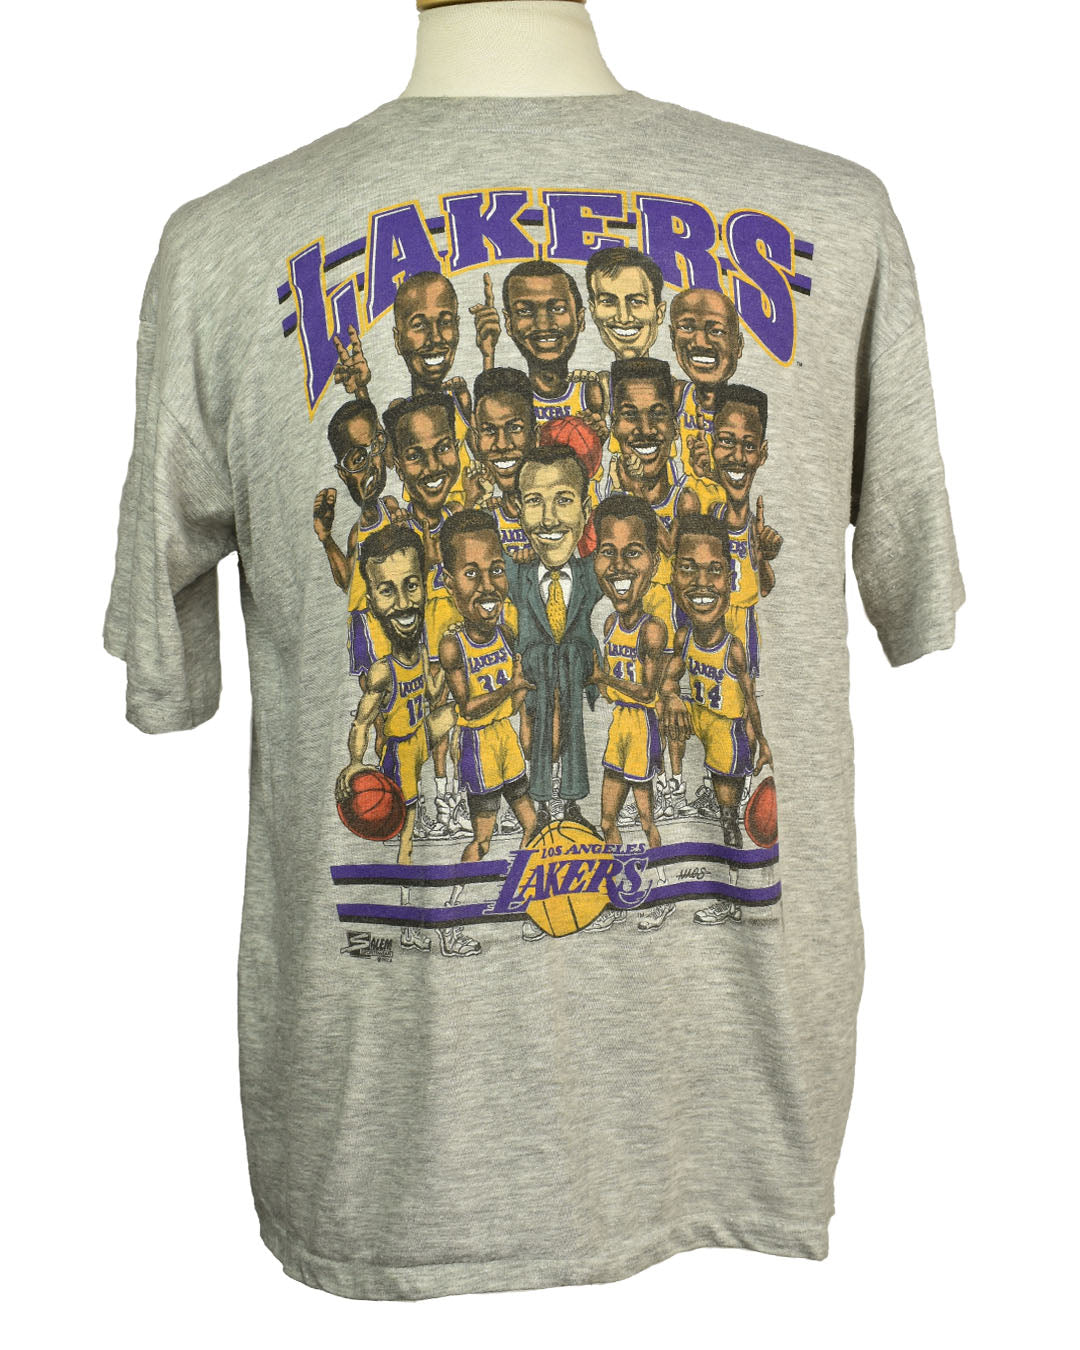 Vintage 90s Lakers NBA Bobble Heads Single Stitch T-shirt Made in USA Size XL